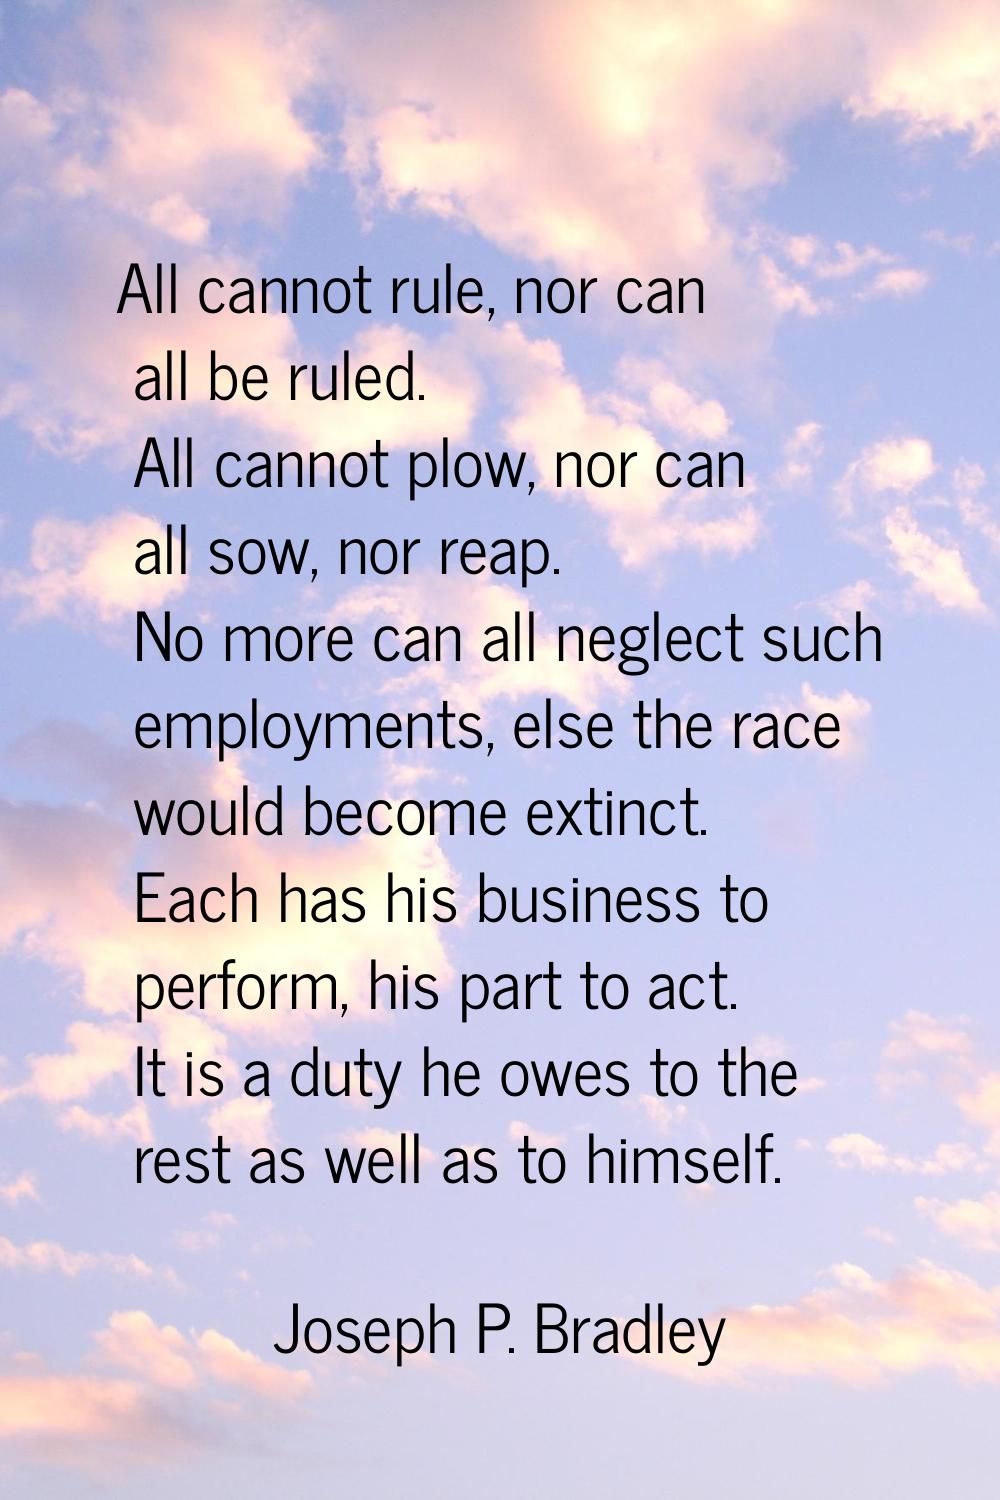 All cannot rule, nor can all be ruled. All cannot plow, nor can all sow, nor reap. No more can all 